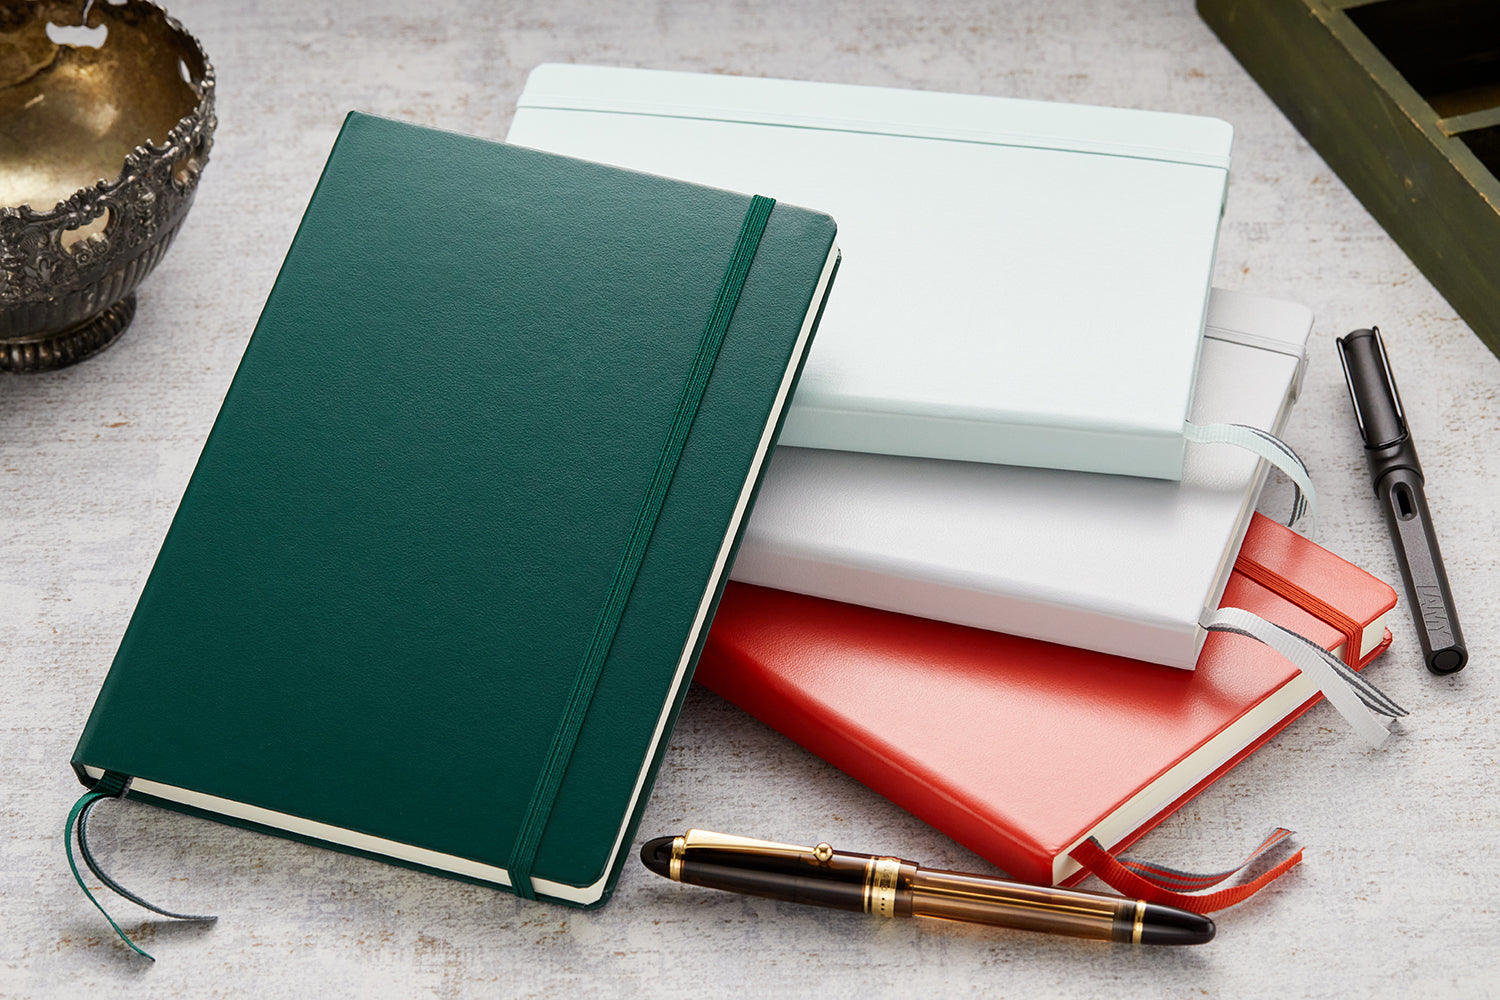 Notebooks: I love testing and experiencing new notebooks and paper, the  same way I do with new inks or pens. I think a good writing experience  comes from the combination of pen